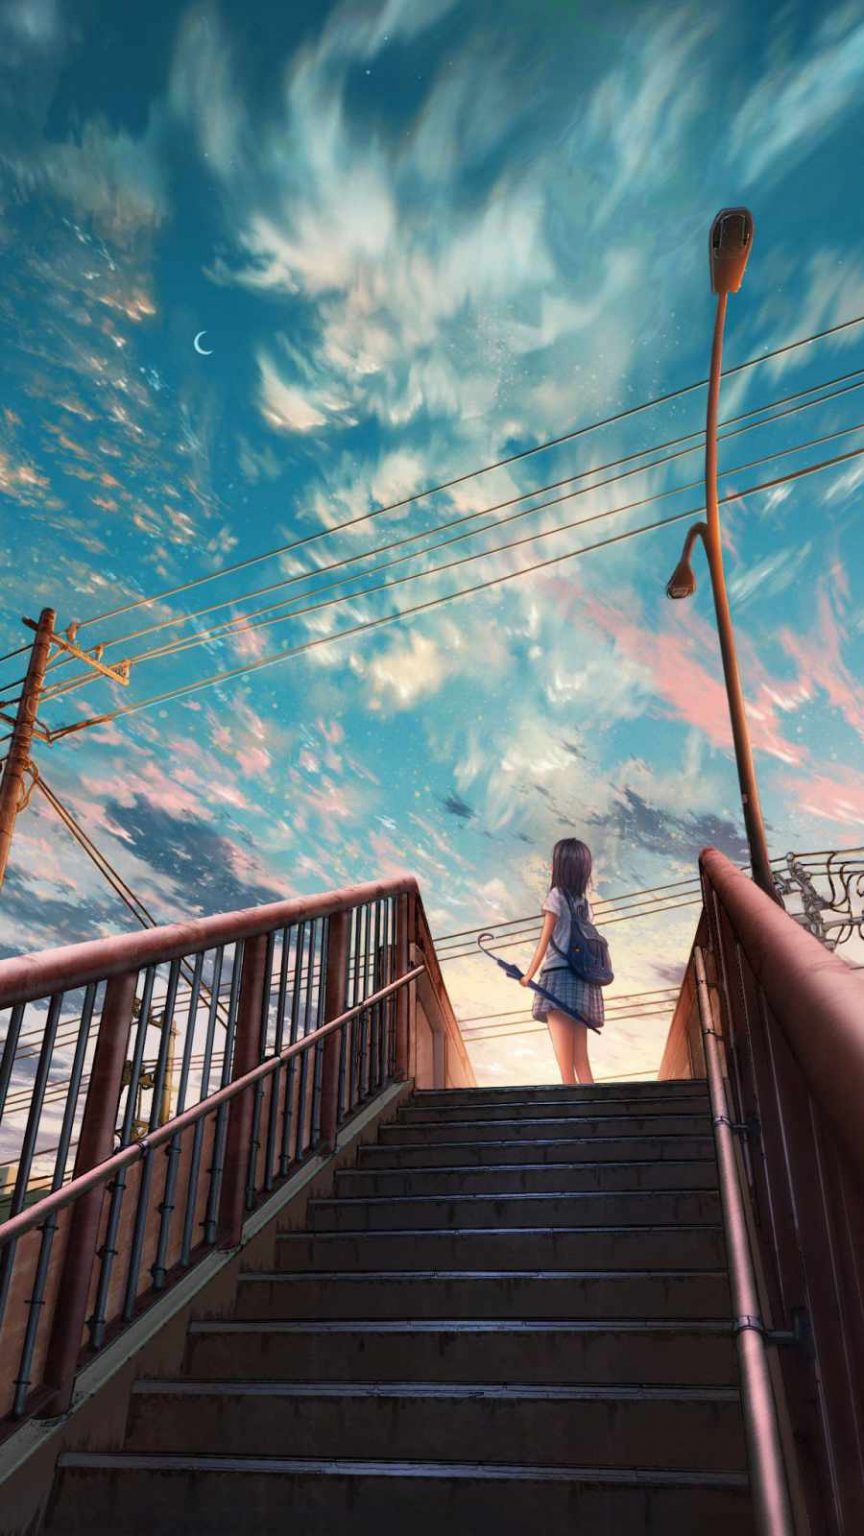 Anime Sky and Girl iPhone Wallpaper - iPhone Wallpapers